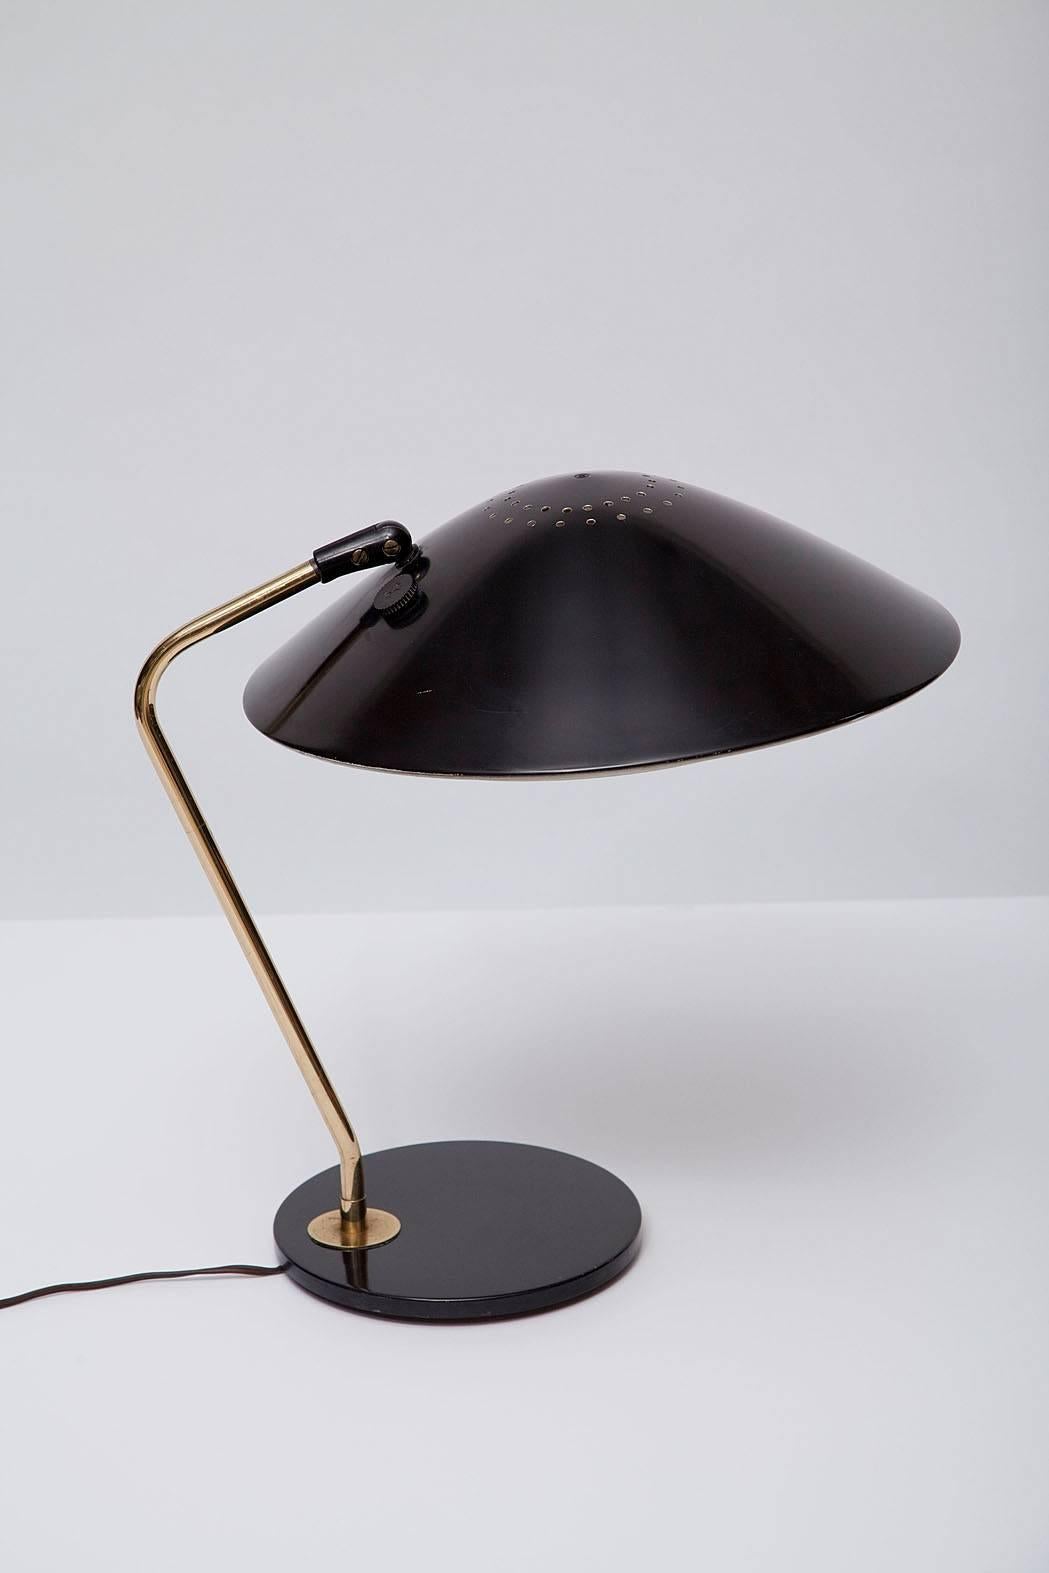 The best of these we've seen! Black enamel and brass desk lamp by Gerald Thurston for Lightolier. All original, with intact plastic diffuser and "Lightolier" branded switch. A handsome classic, not to be missed.